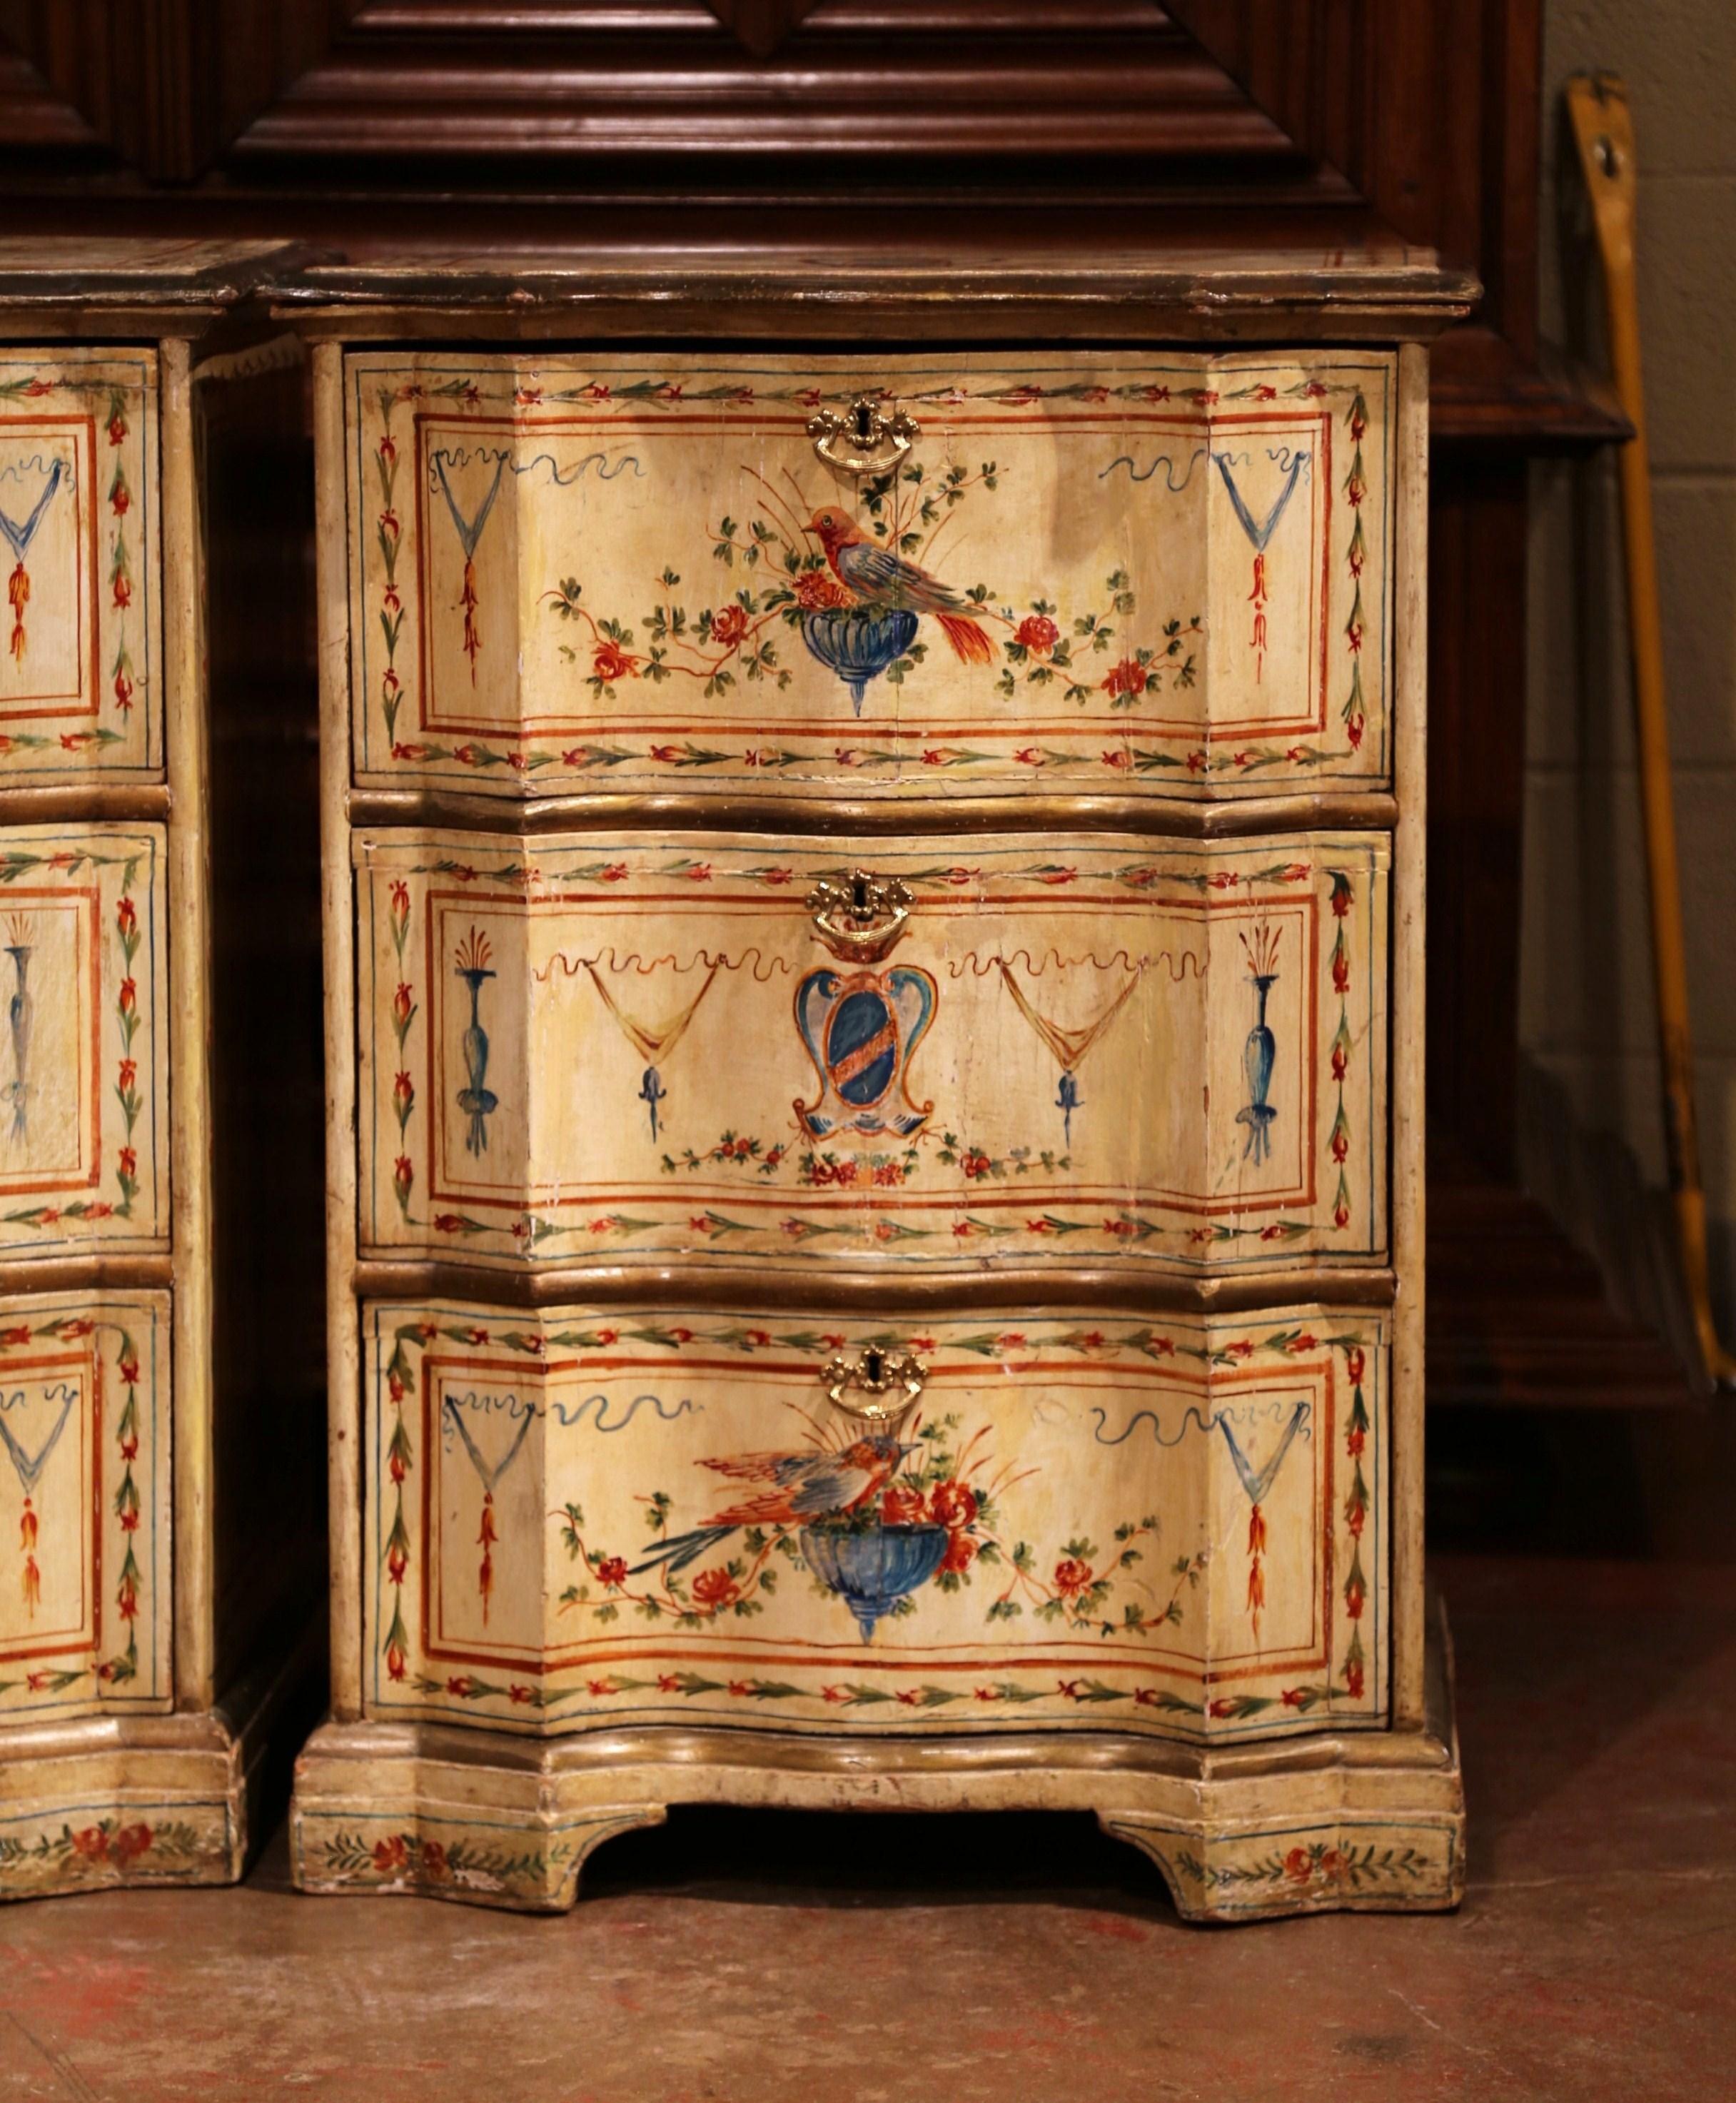 Pair of 19th Century Italian Carved Painted Chests of Drawers with Bird Decor (19. Jahrhundert)